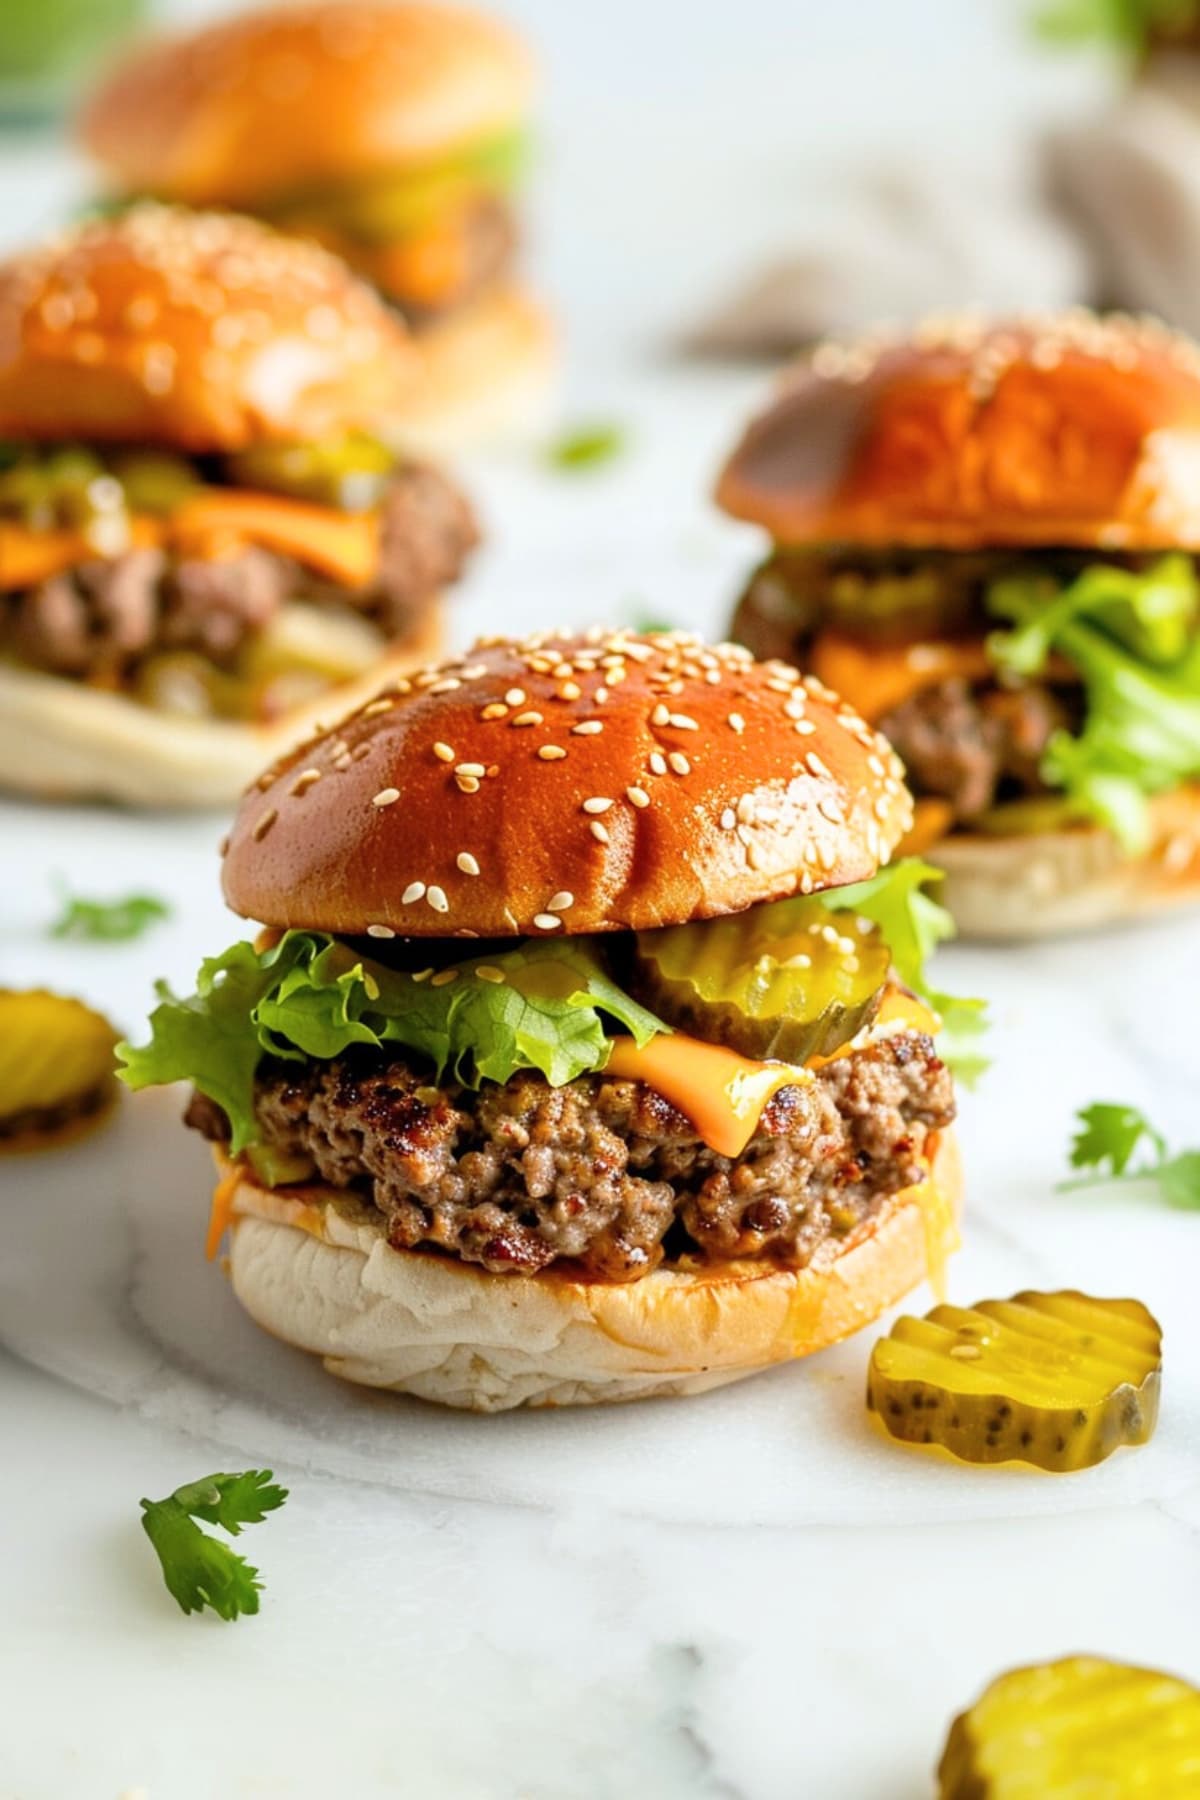 Big mac sliders with ground beef, pickles, lettuce and cheese